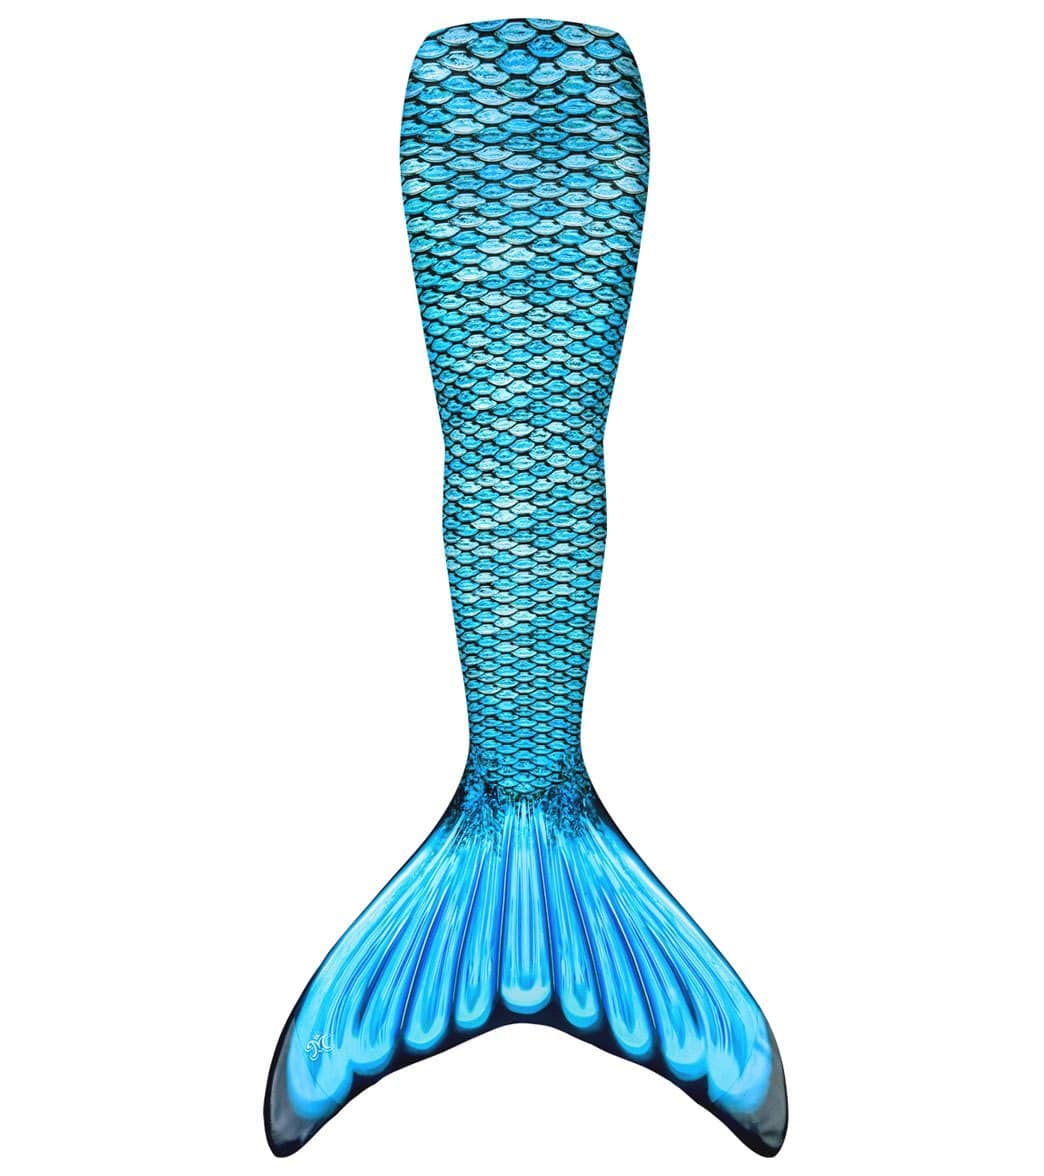 Fin Fun Tidal Teal Mermaid Tail & Monofin Youth/Adult - Adultlarge Neoprene/Polyester/Poly-Propylene/Spandex - Swimoutlet.com